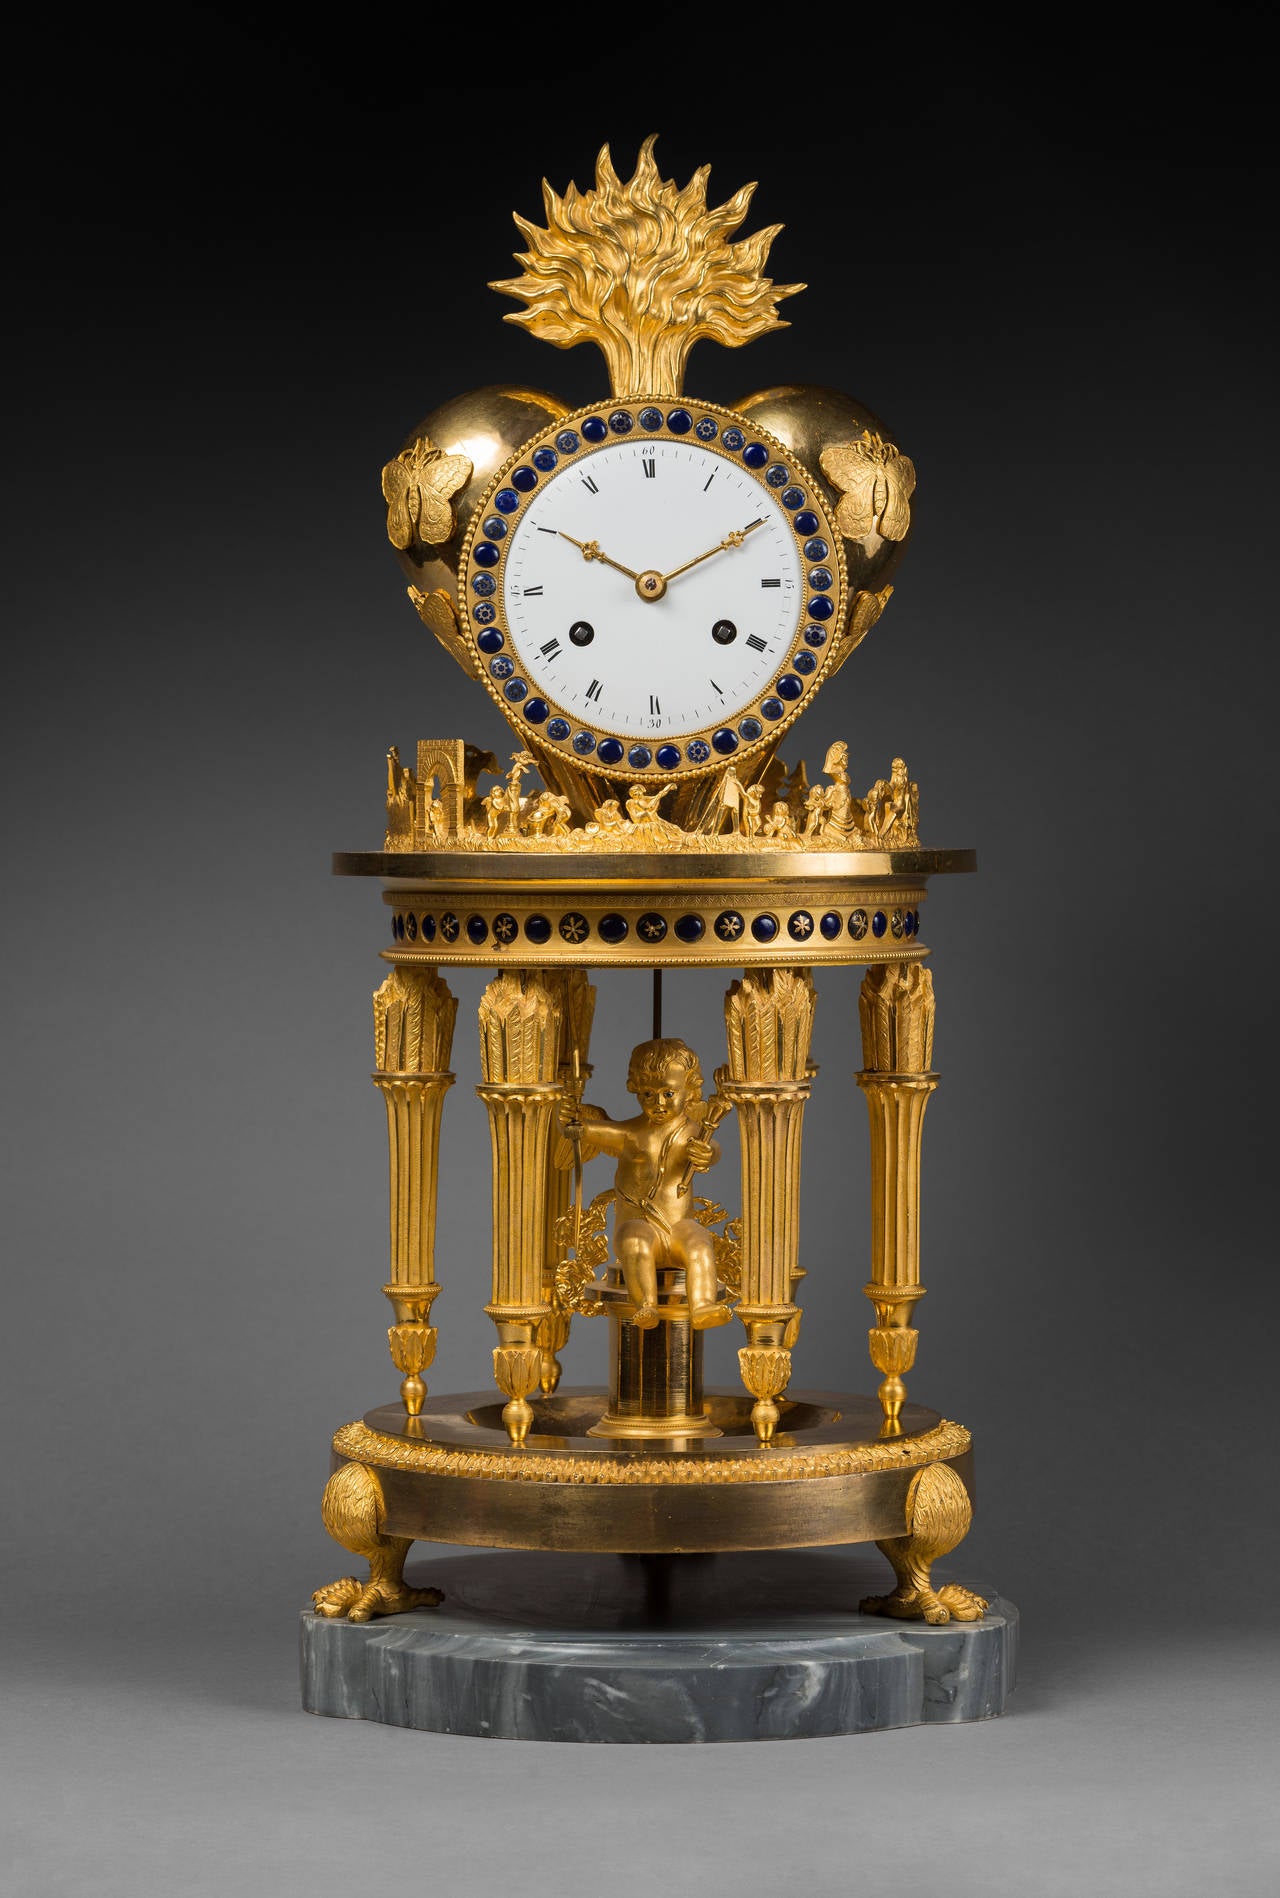 Case Attributed to Jean-Simon Deverberie (1764–1824).

Rare chased and gilt bronze mantel clock 
“The Temple of Love” 

Paris, Directoire period, circa 1795. 
Dimensions: Height 51 cm; diameter 23 cm.

The enamel dial indicates the hours in